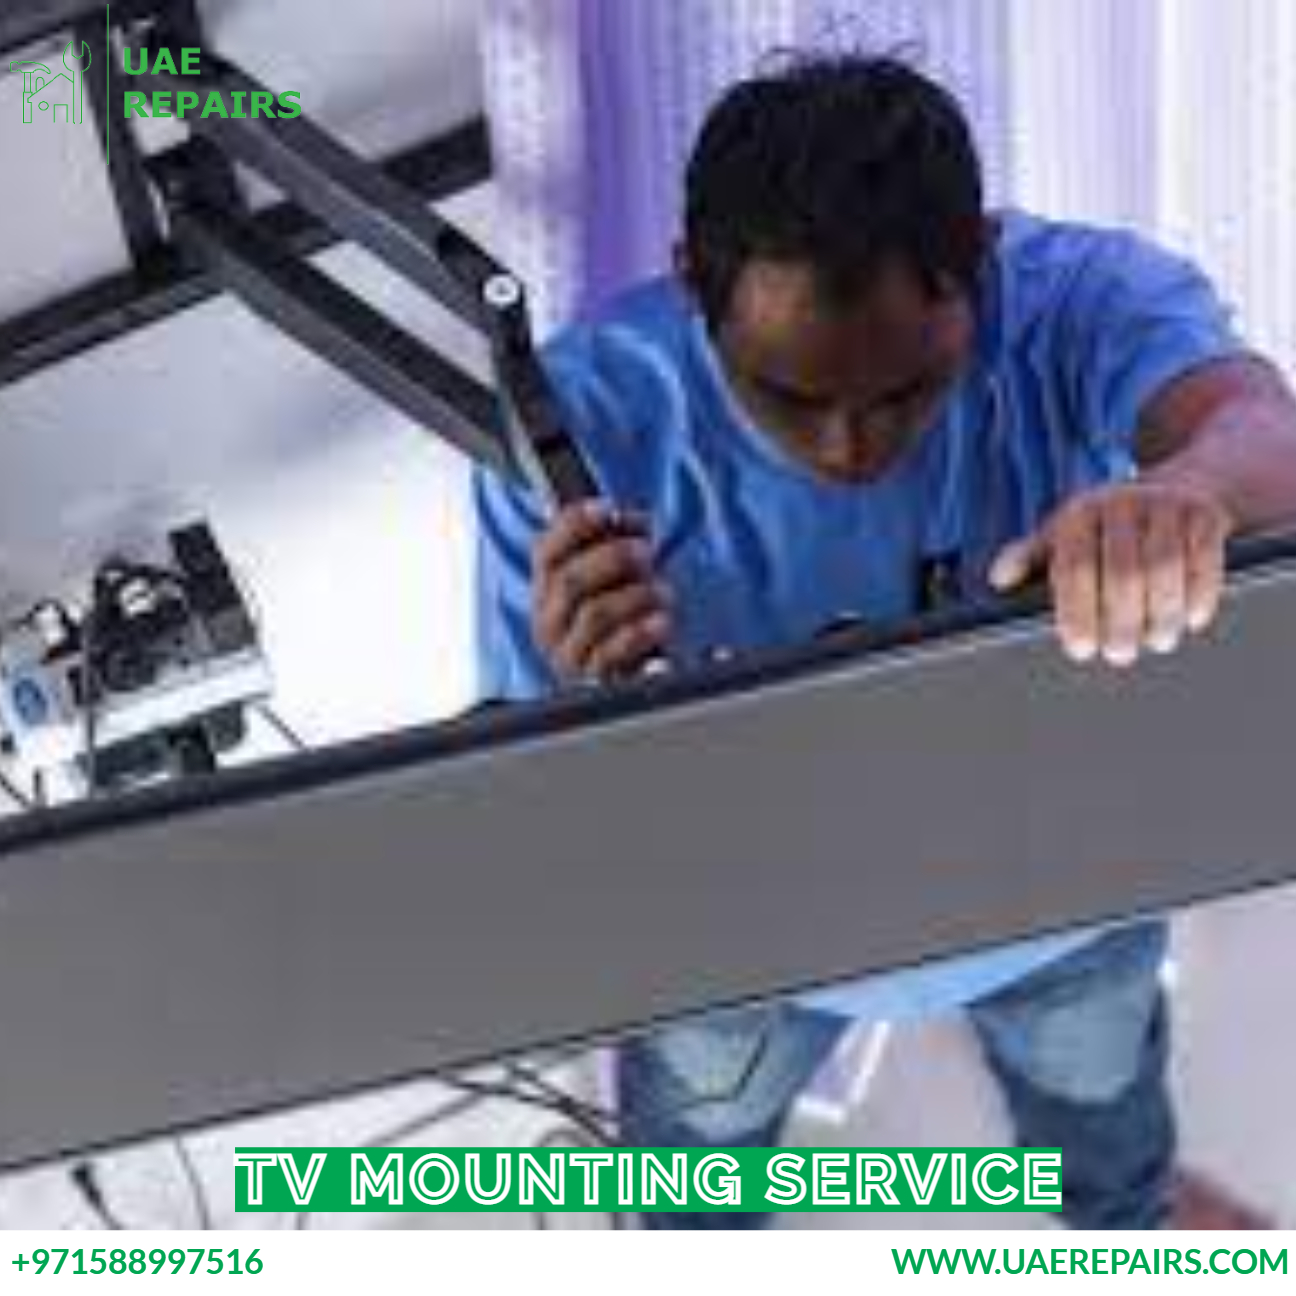 UAE REPAIRS Importance of professional Tv Mounting Service